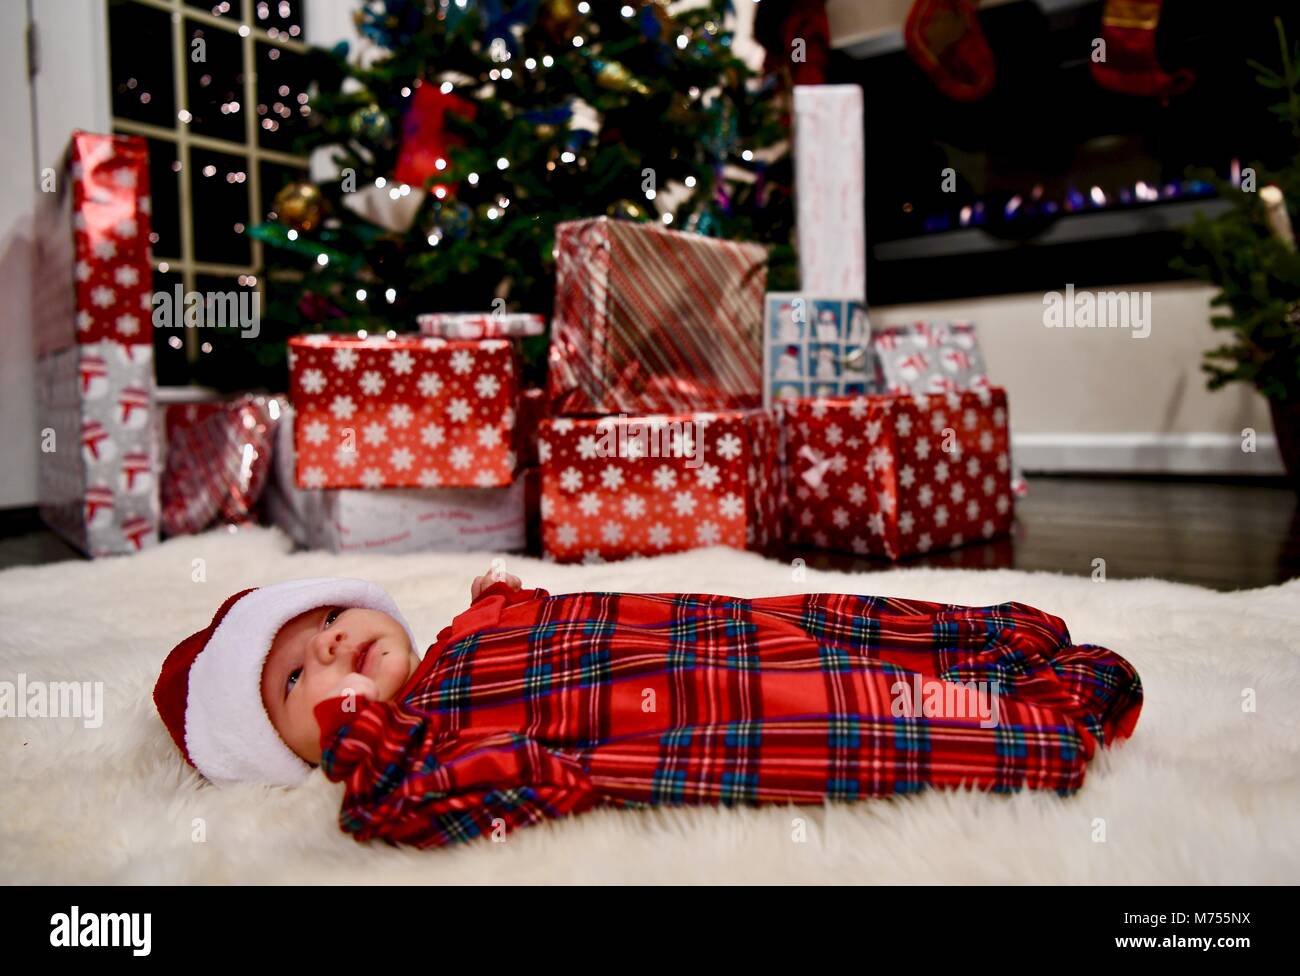 Newborn baby aged 1-4 months dressed up on Christmas eve laying next to a Christmas tree with presents Stock Photo